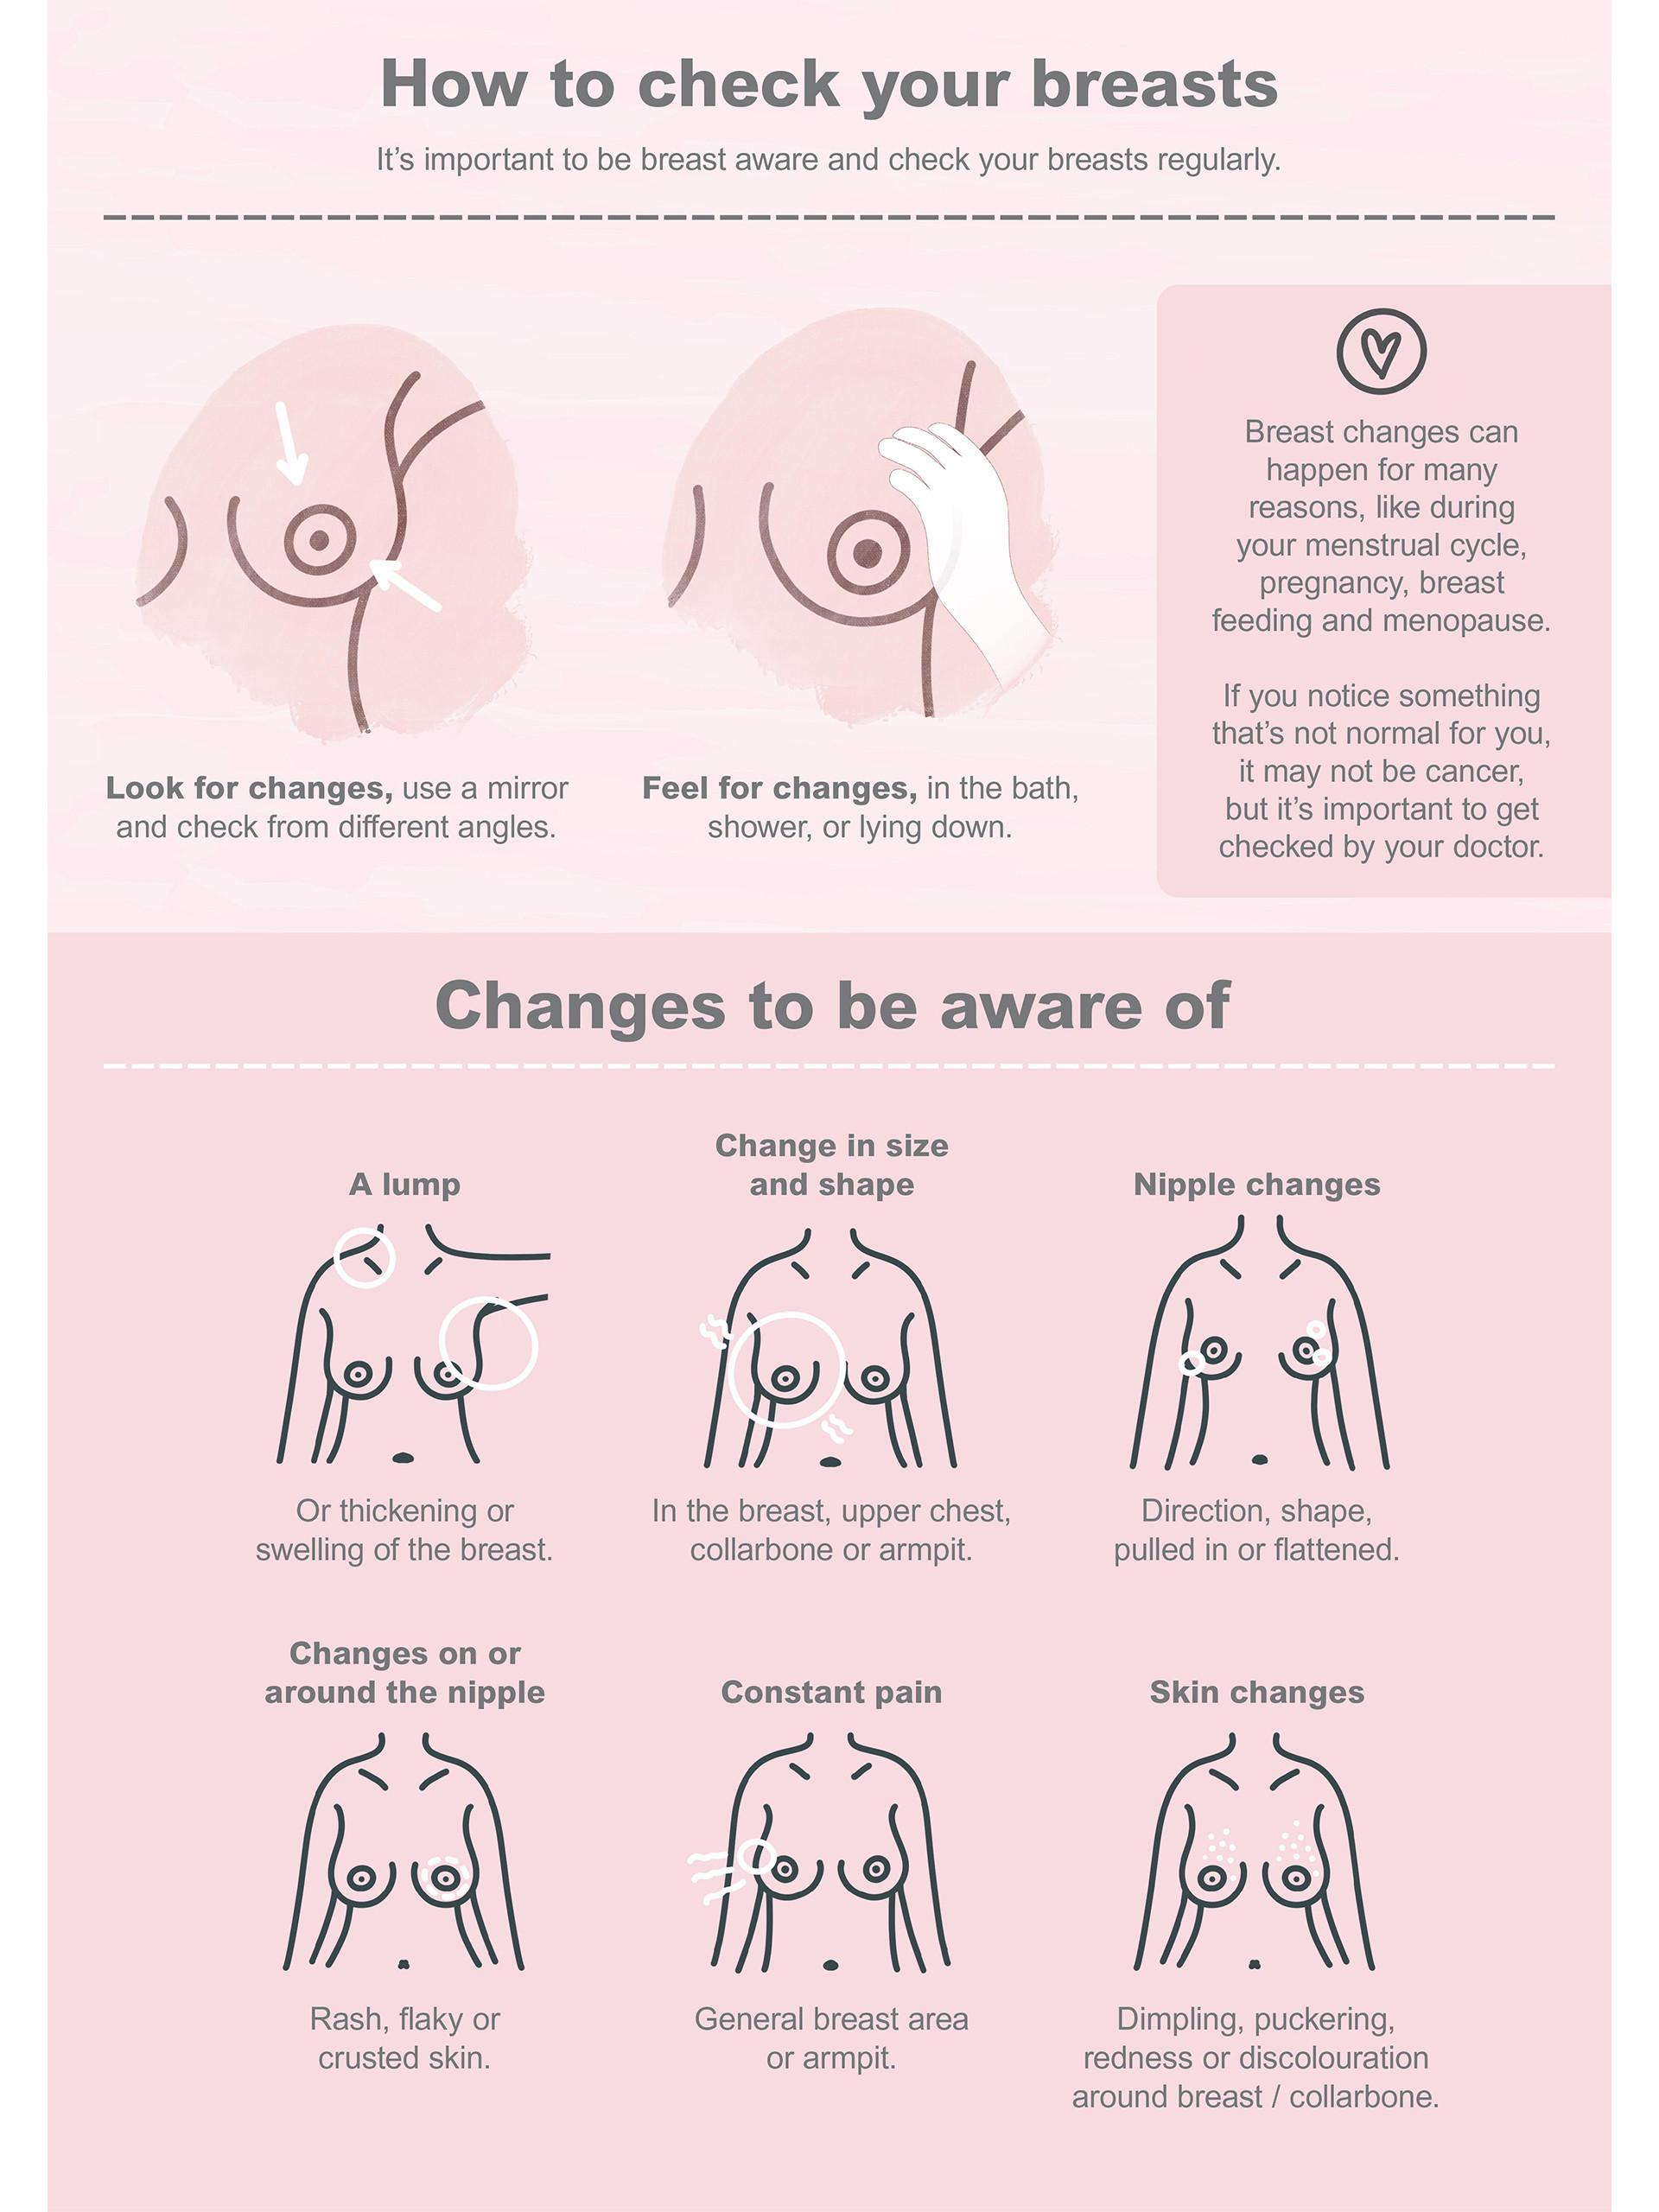 An Illustrated poster showing how to check your breasts and things to be aware of.